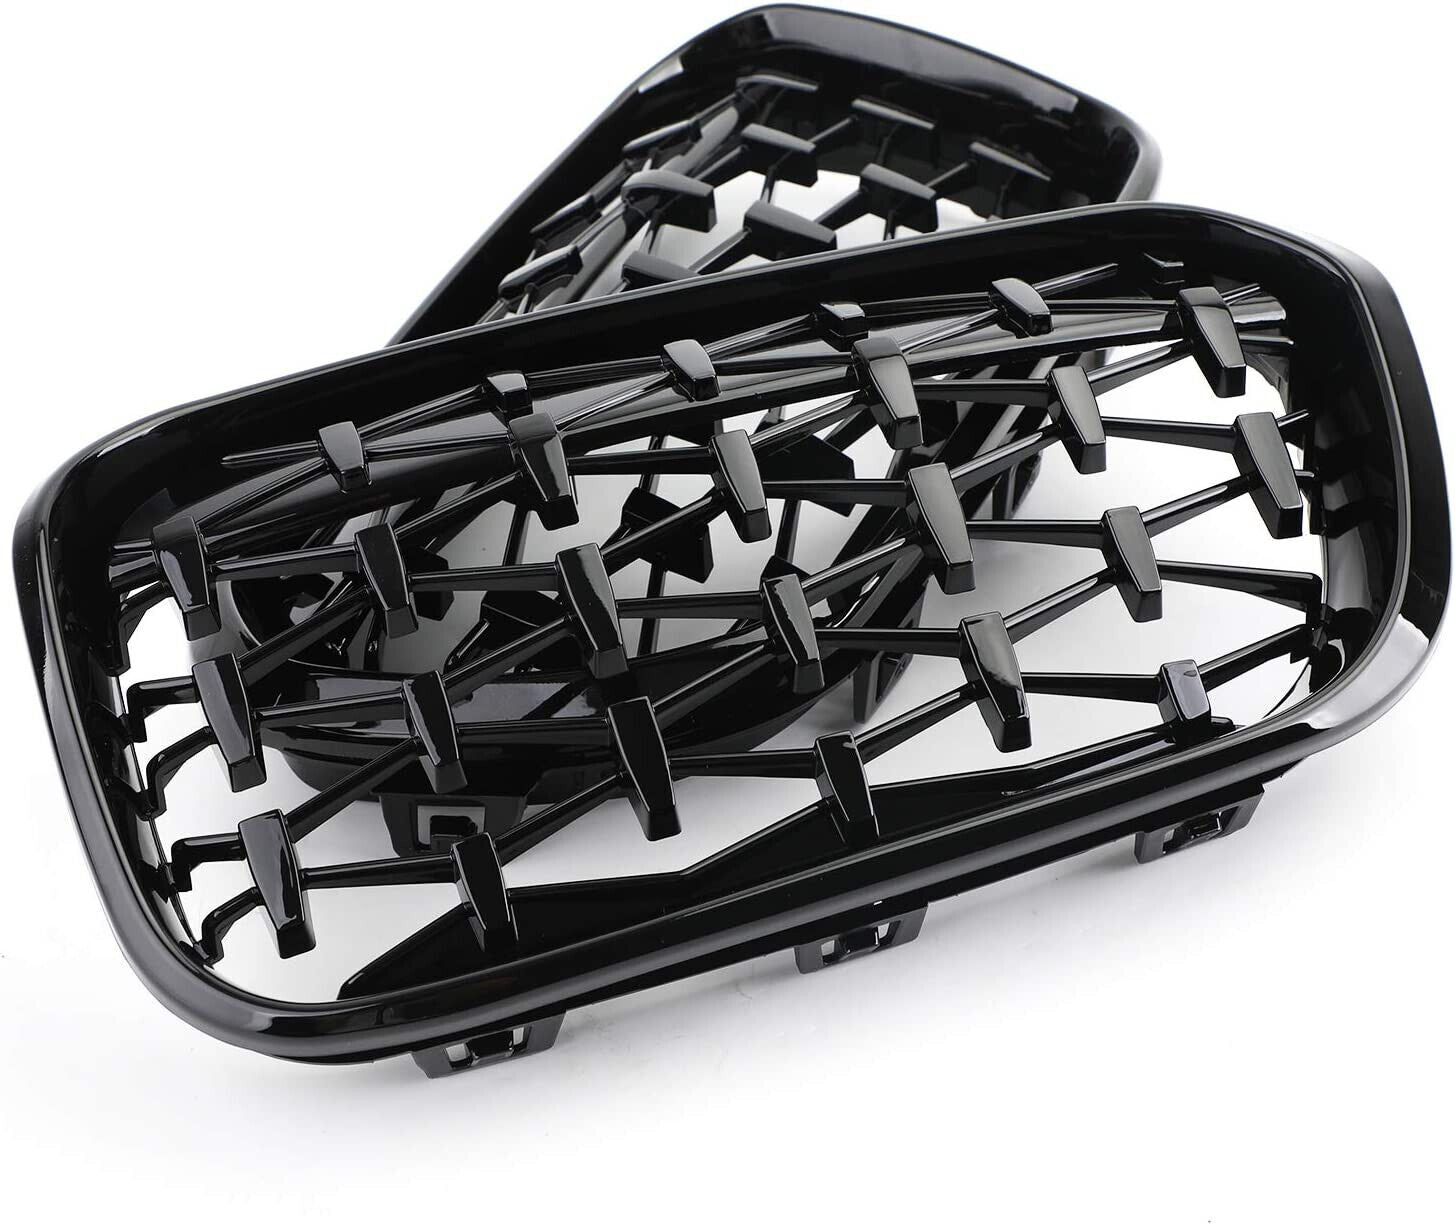 FOR BMW F20 F21 1 SERIES DIAMOND BLACK FRONT KIDNEY GRILLE GRILL 15-19